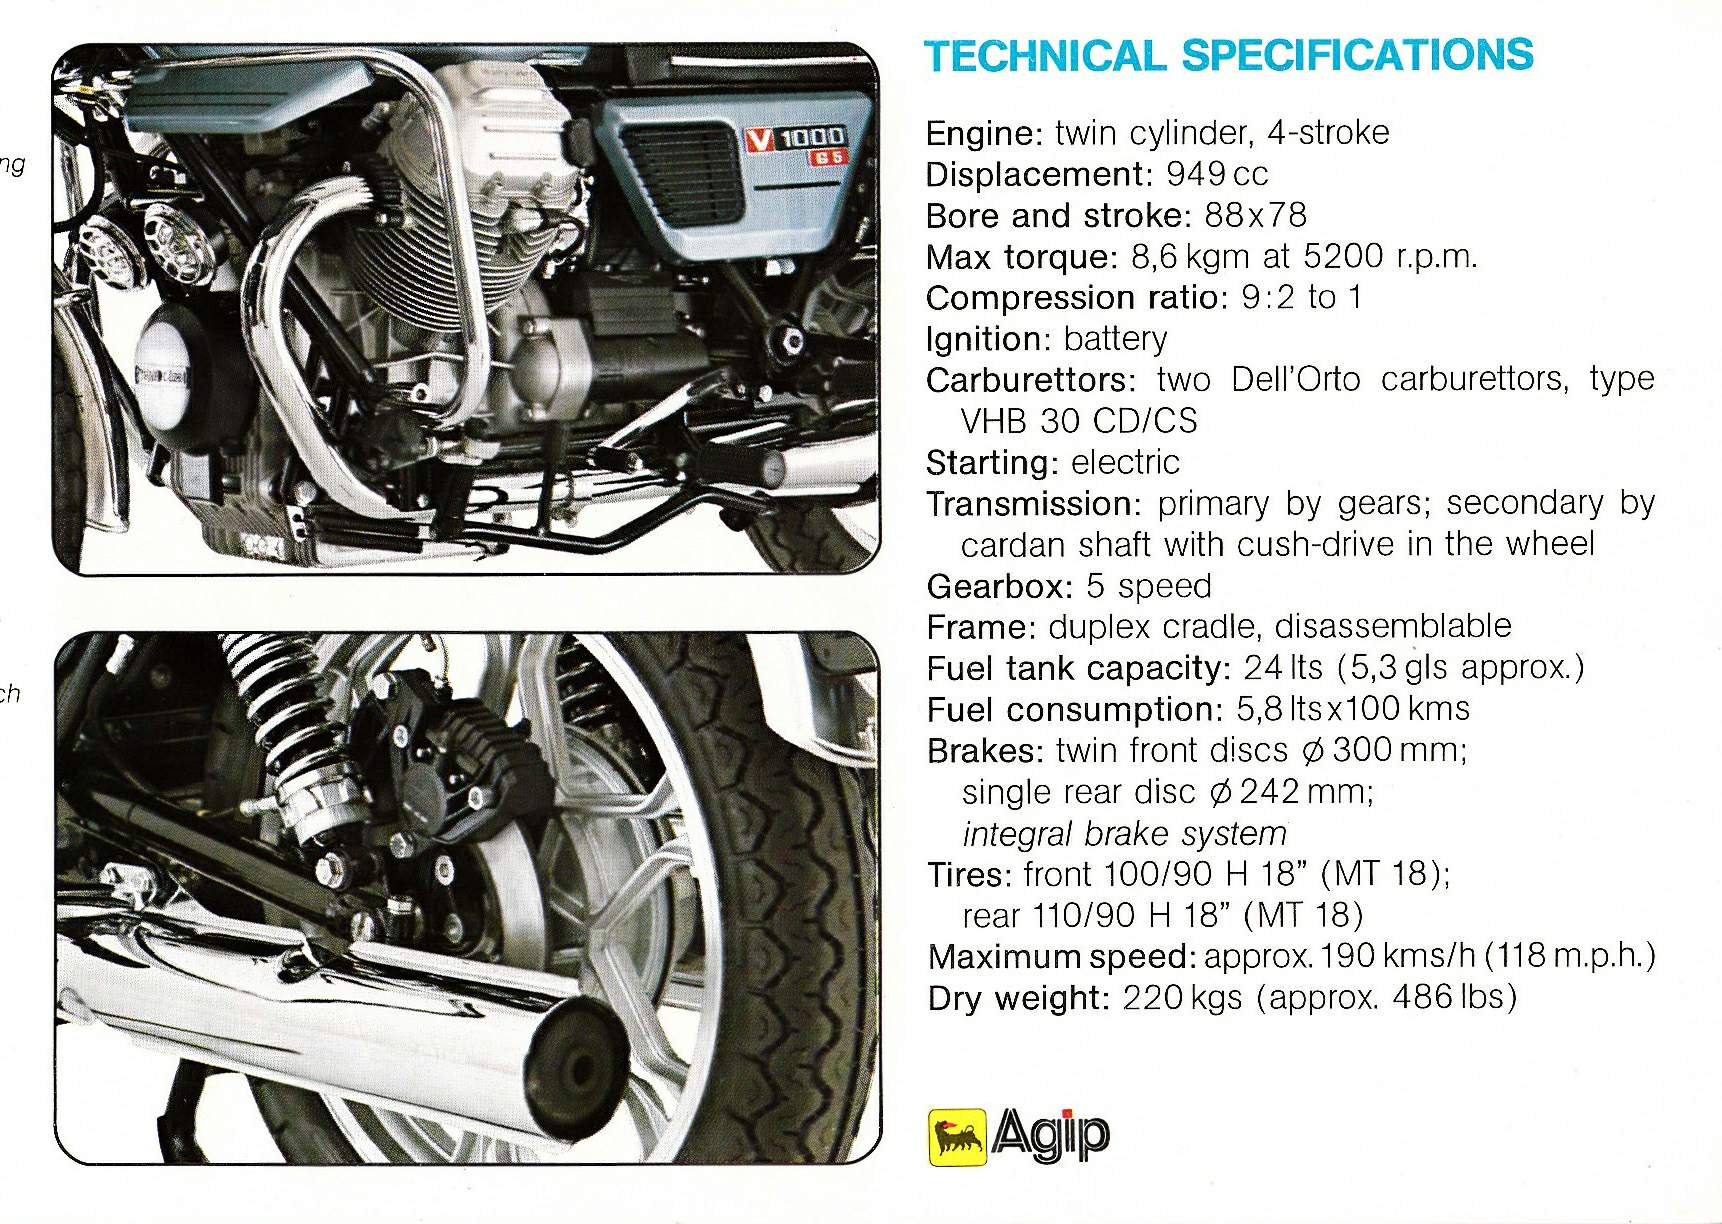 Moto Guzzi V 1000G5 For Sale Specifications, Price and Images